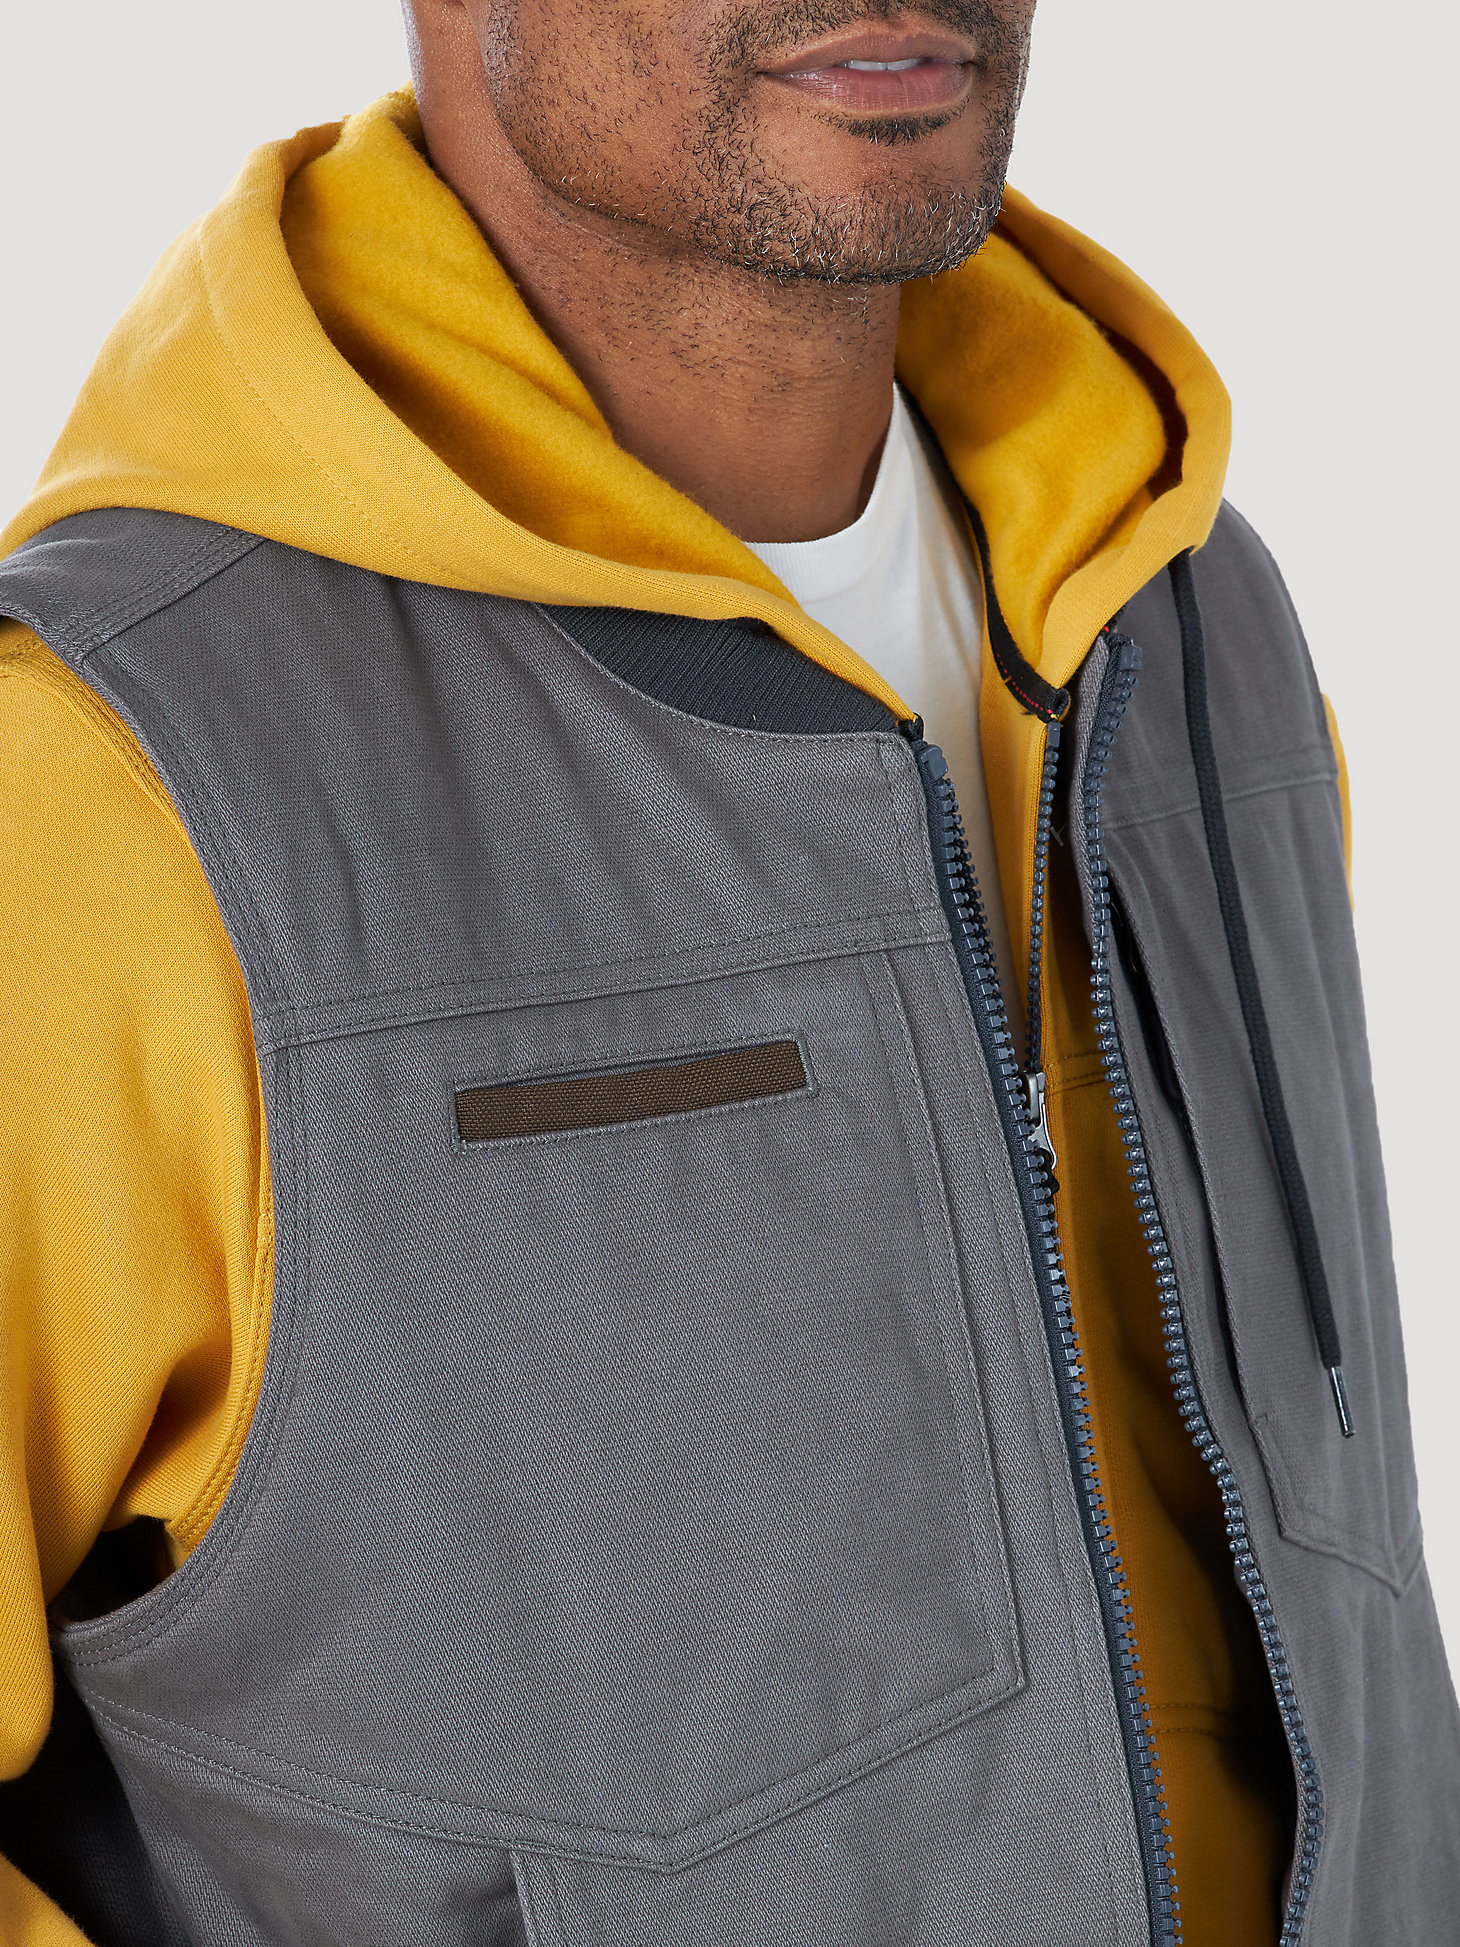 Wrangler® RIGGS Workwear® Tough Layers Insulated Work Vest in Granite Grey alternative view 3